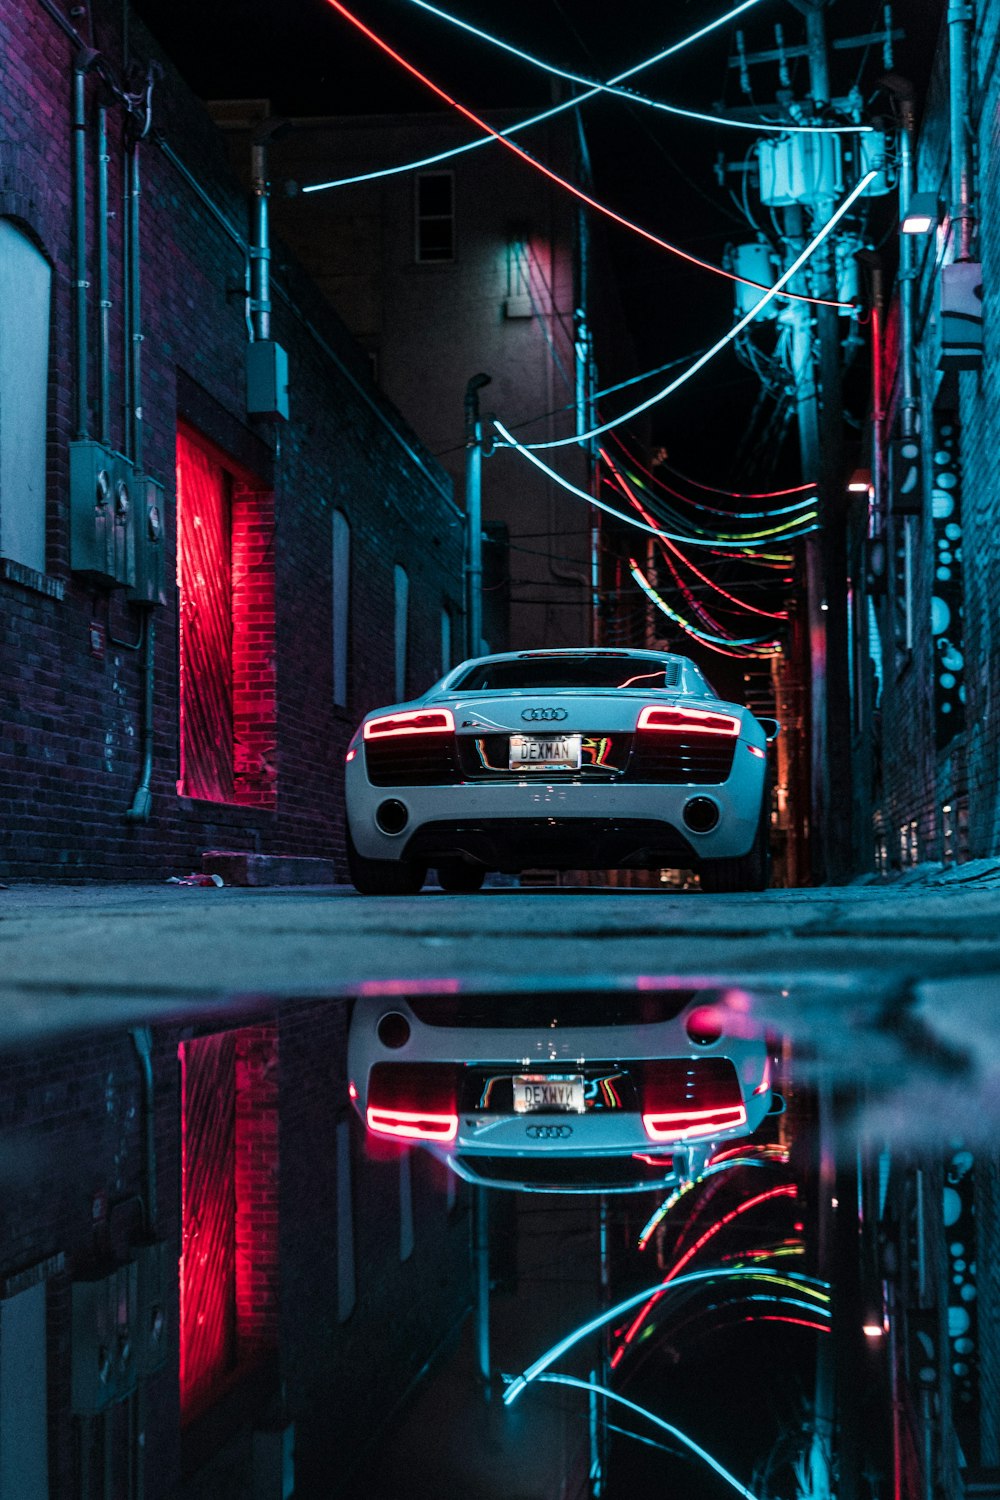 500 Audi Wallpapers Hd Download Free Images On Unsplash